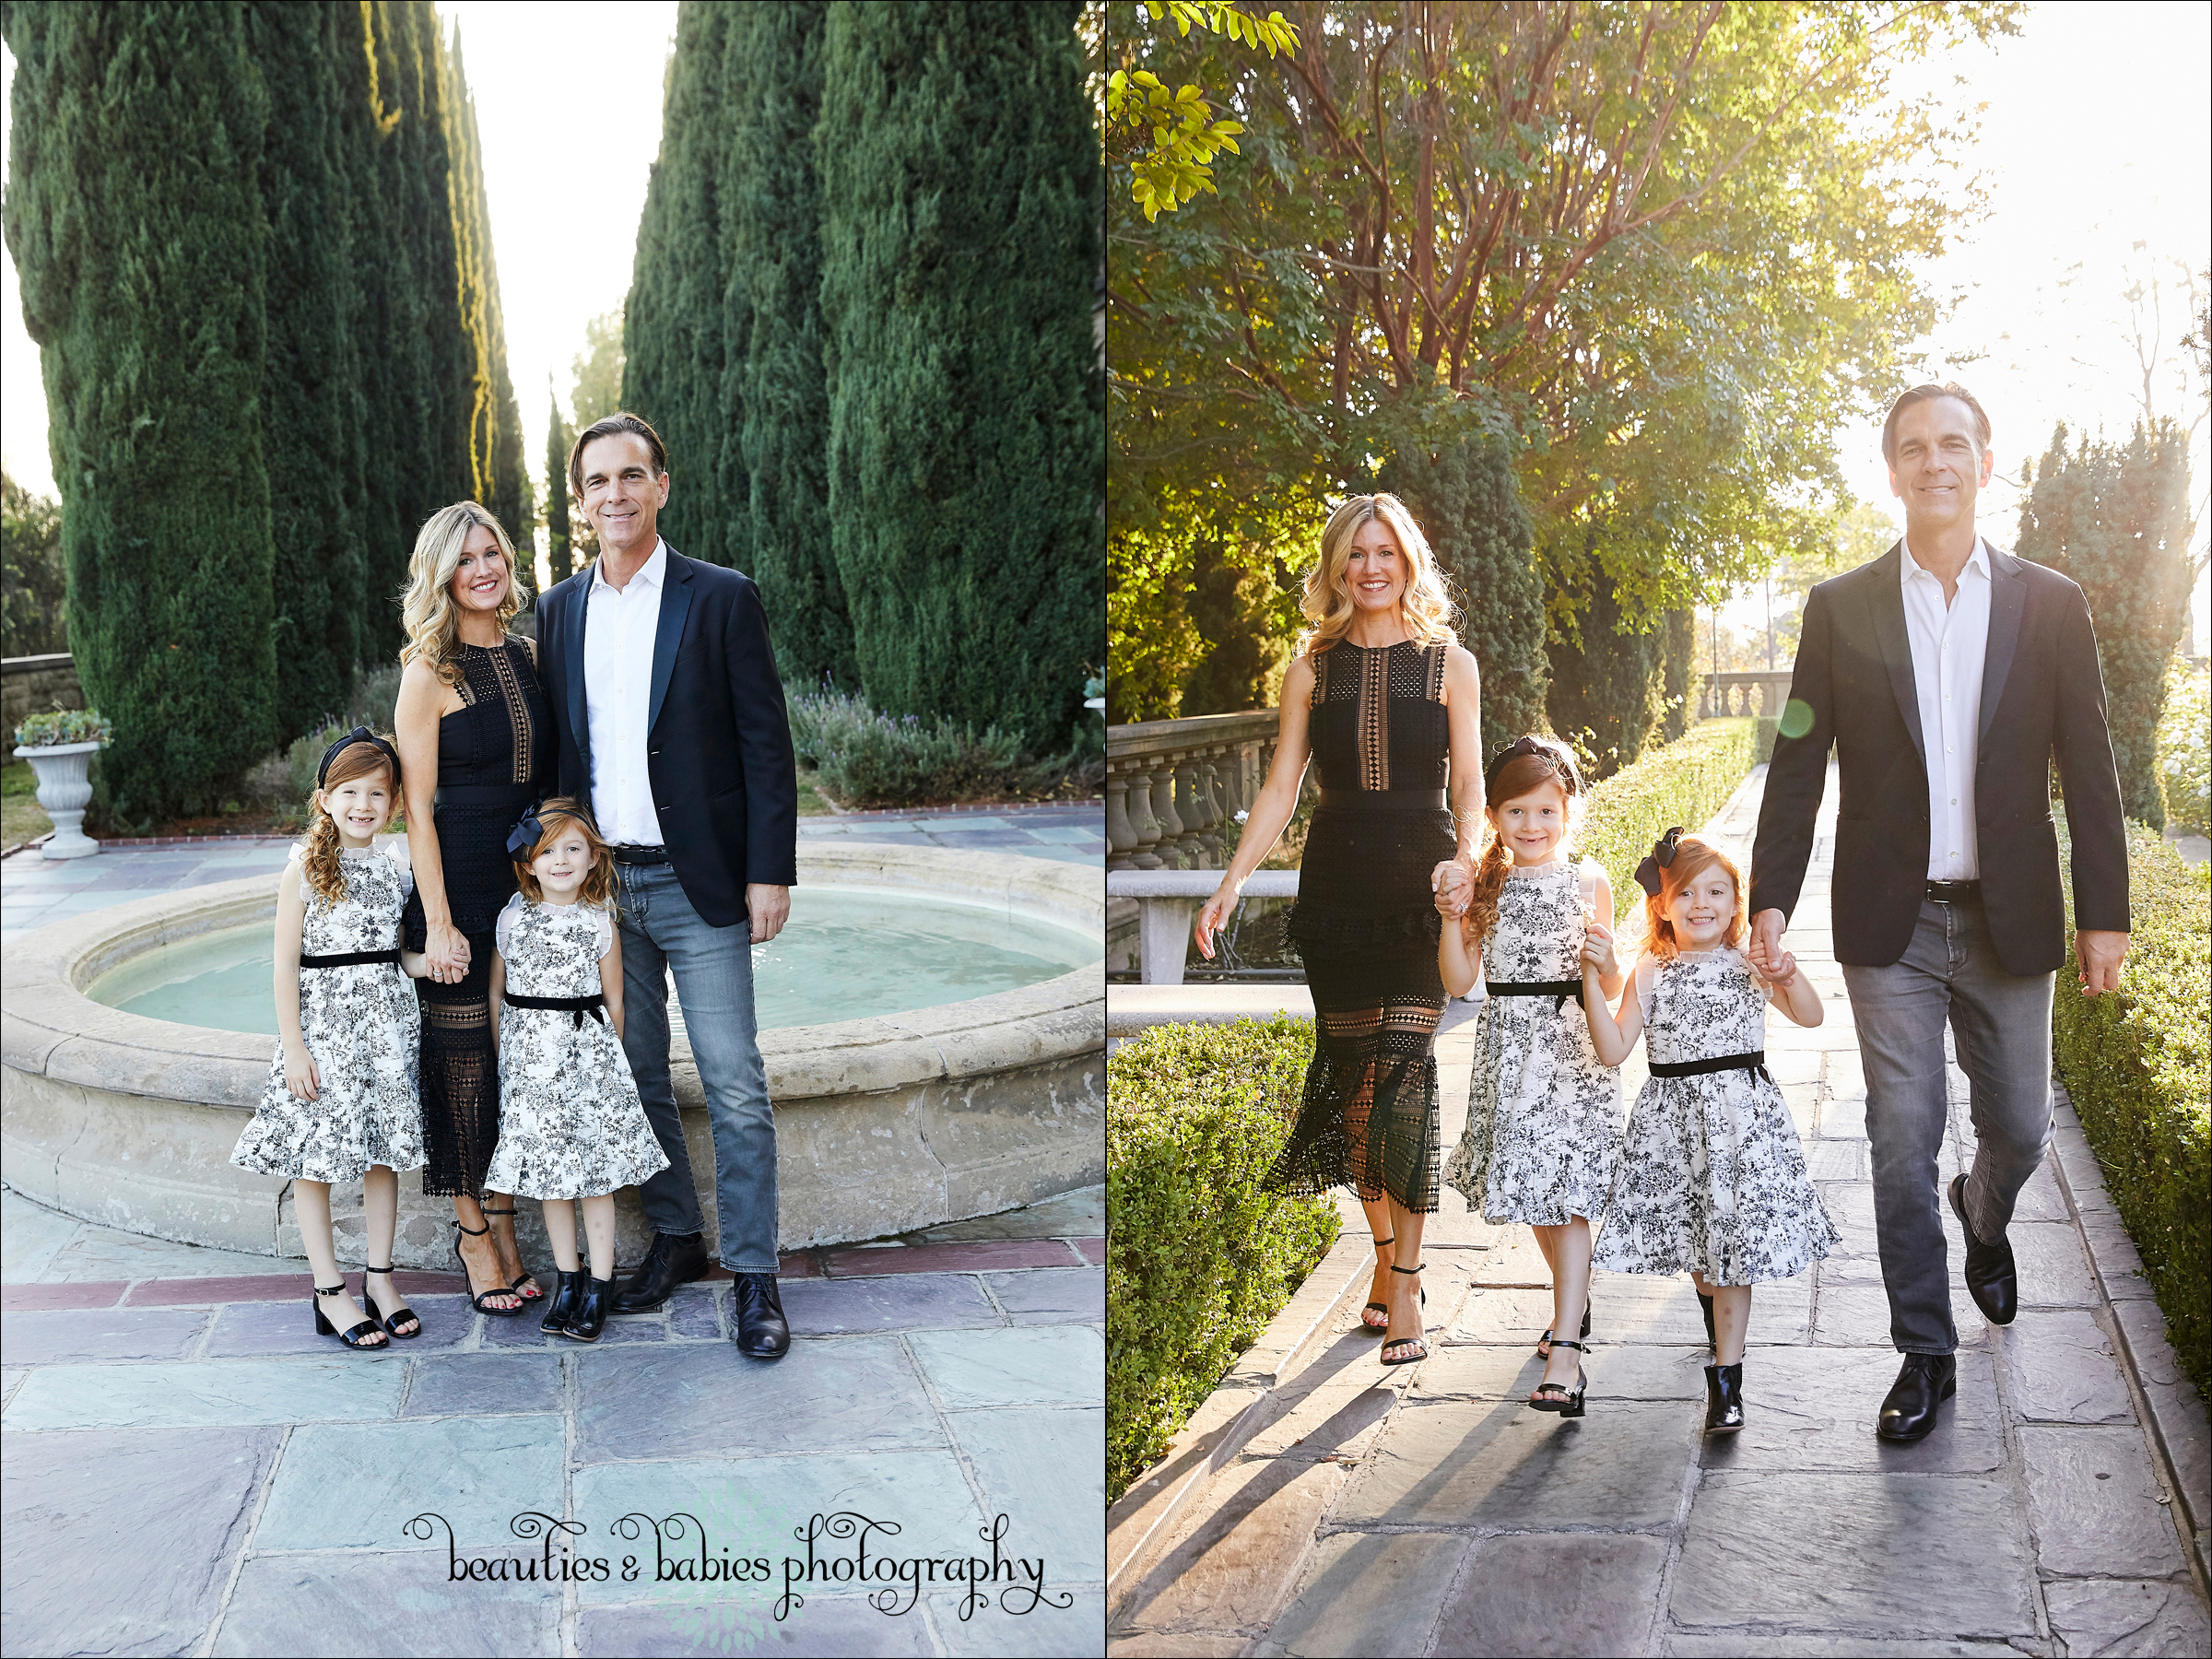 Professional family photographer Los Angeles portrait and lifestyle outdoor photography